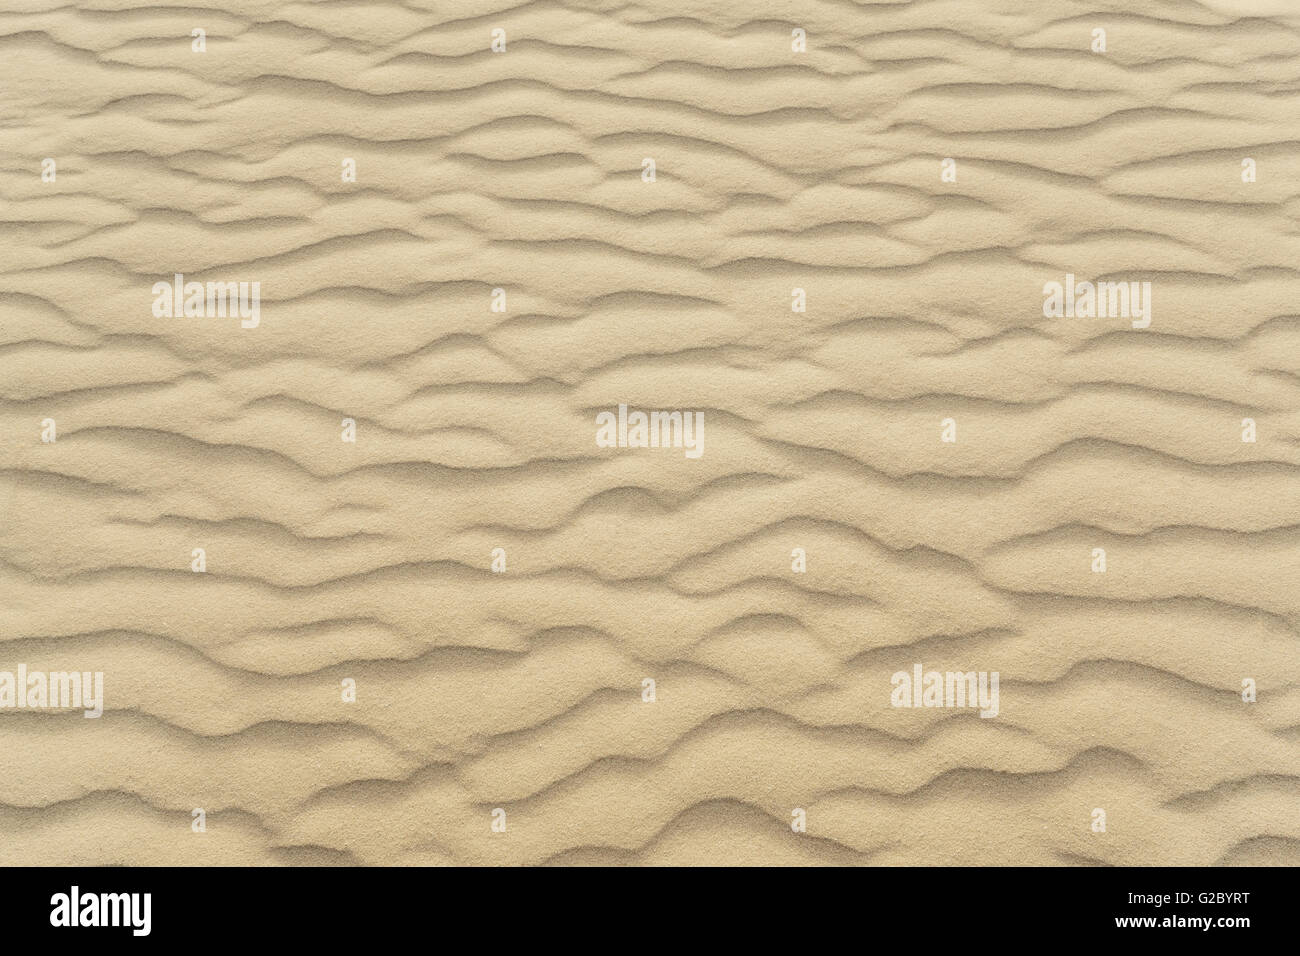 Waves of beach sand texture and background Stock Photo